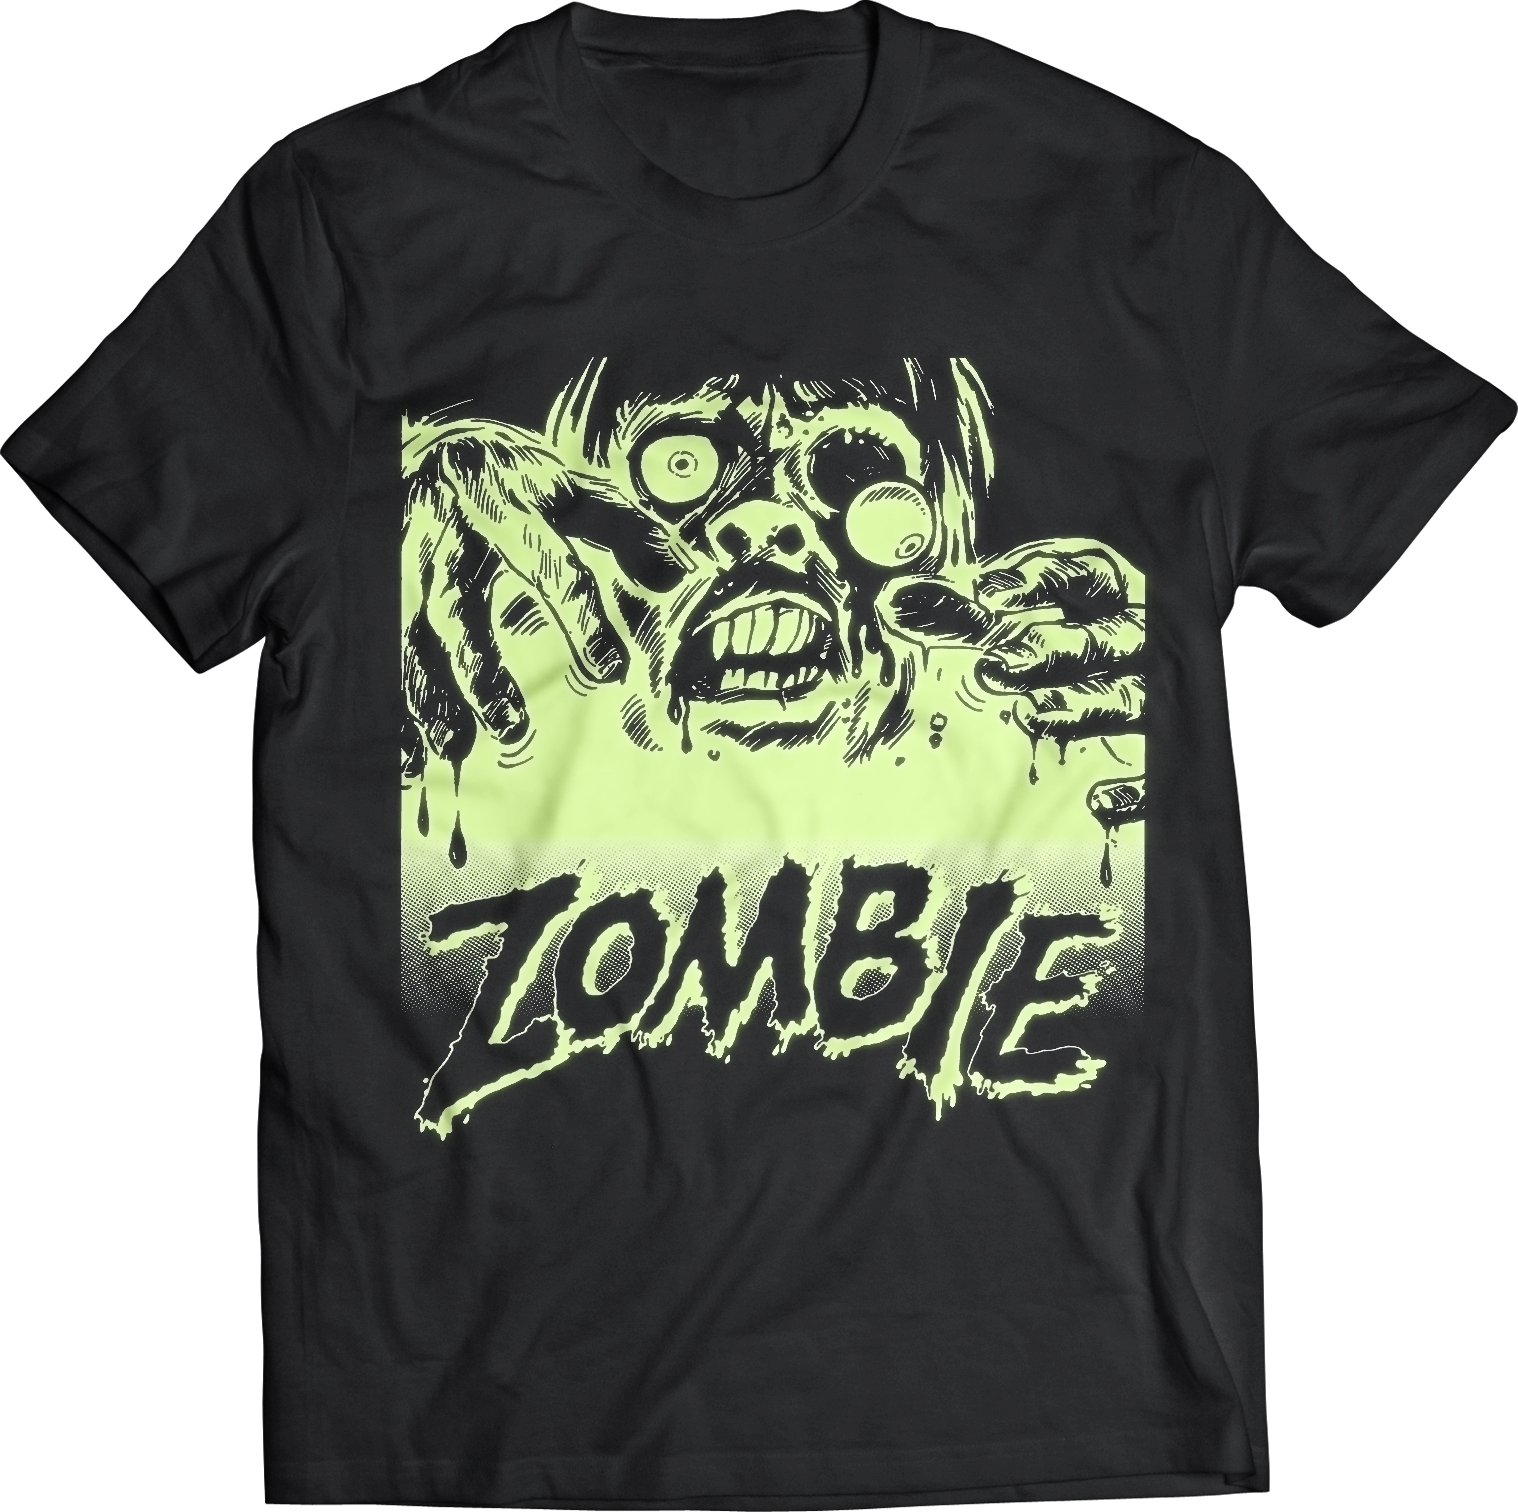 DARIO ARGENTO "ZOMBIE" LIMITED EDITION GLOW IN THE DARK T-SHIRT